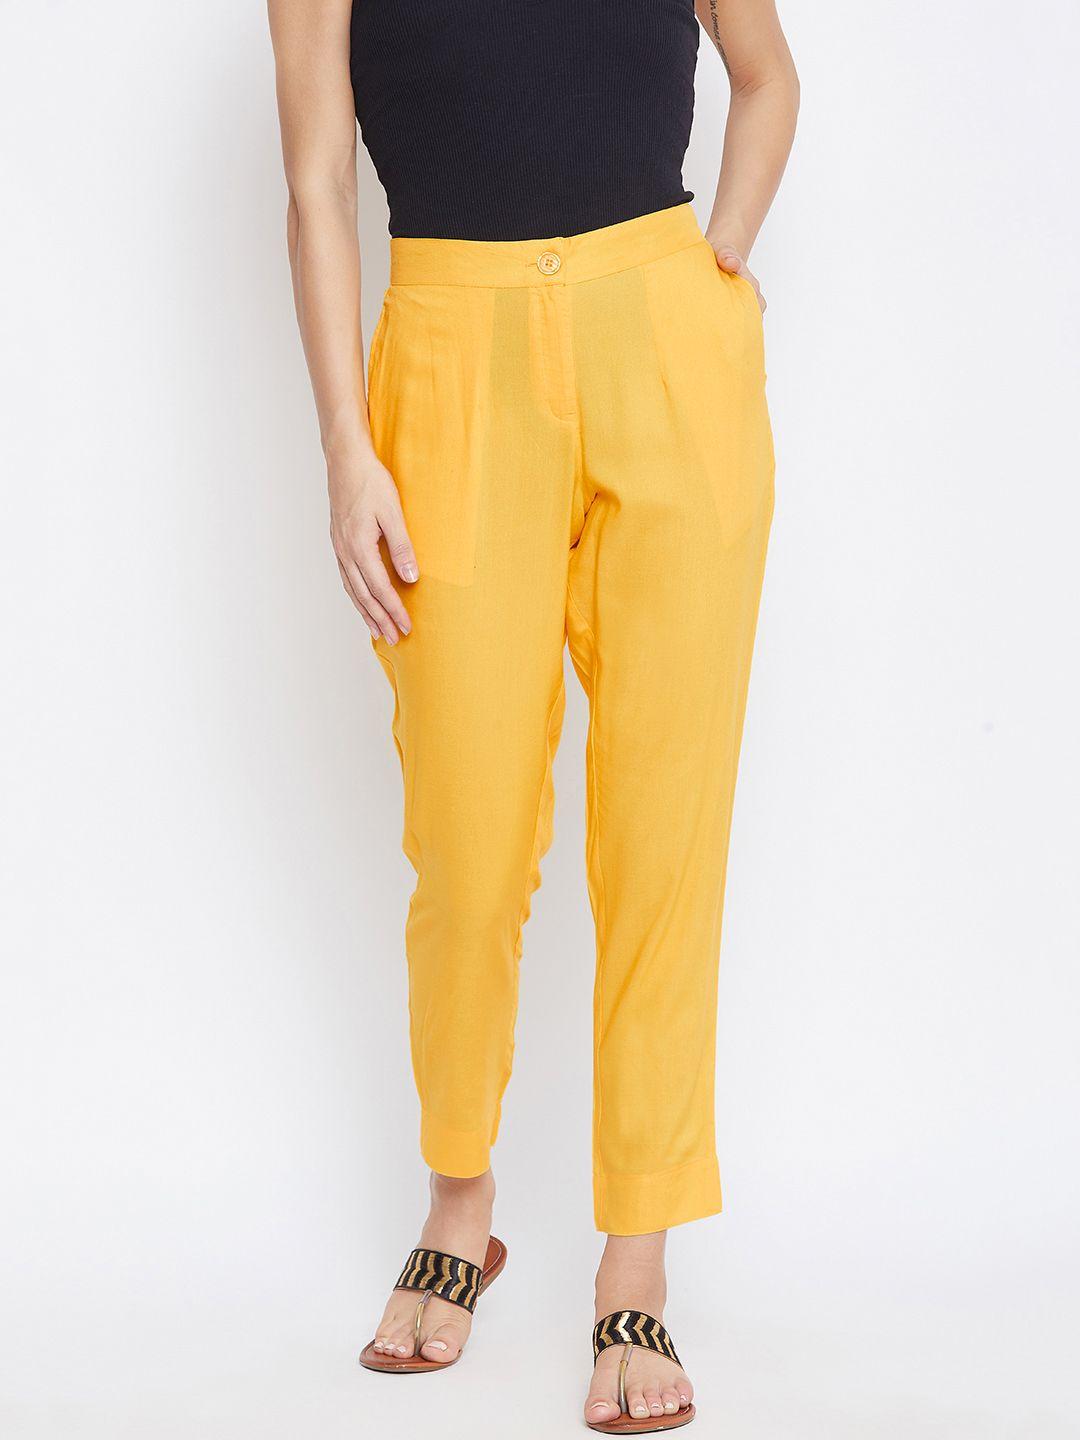 fabglobal women yellow relaxed slim fit solid regular trousers